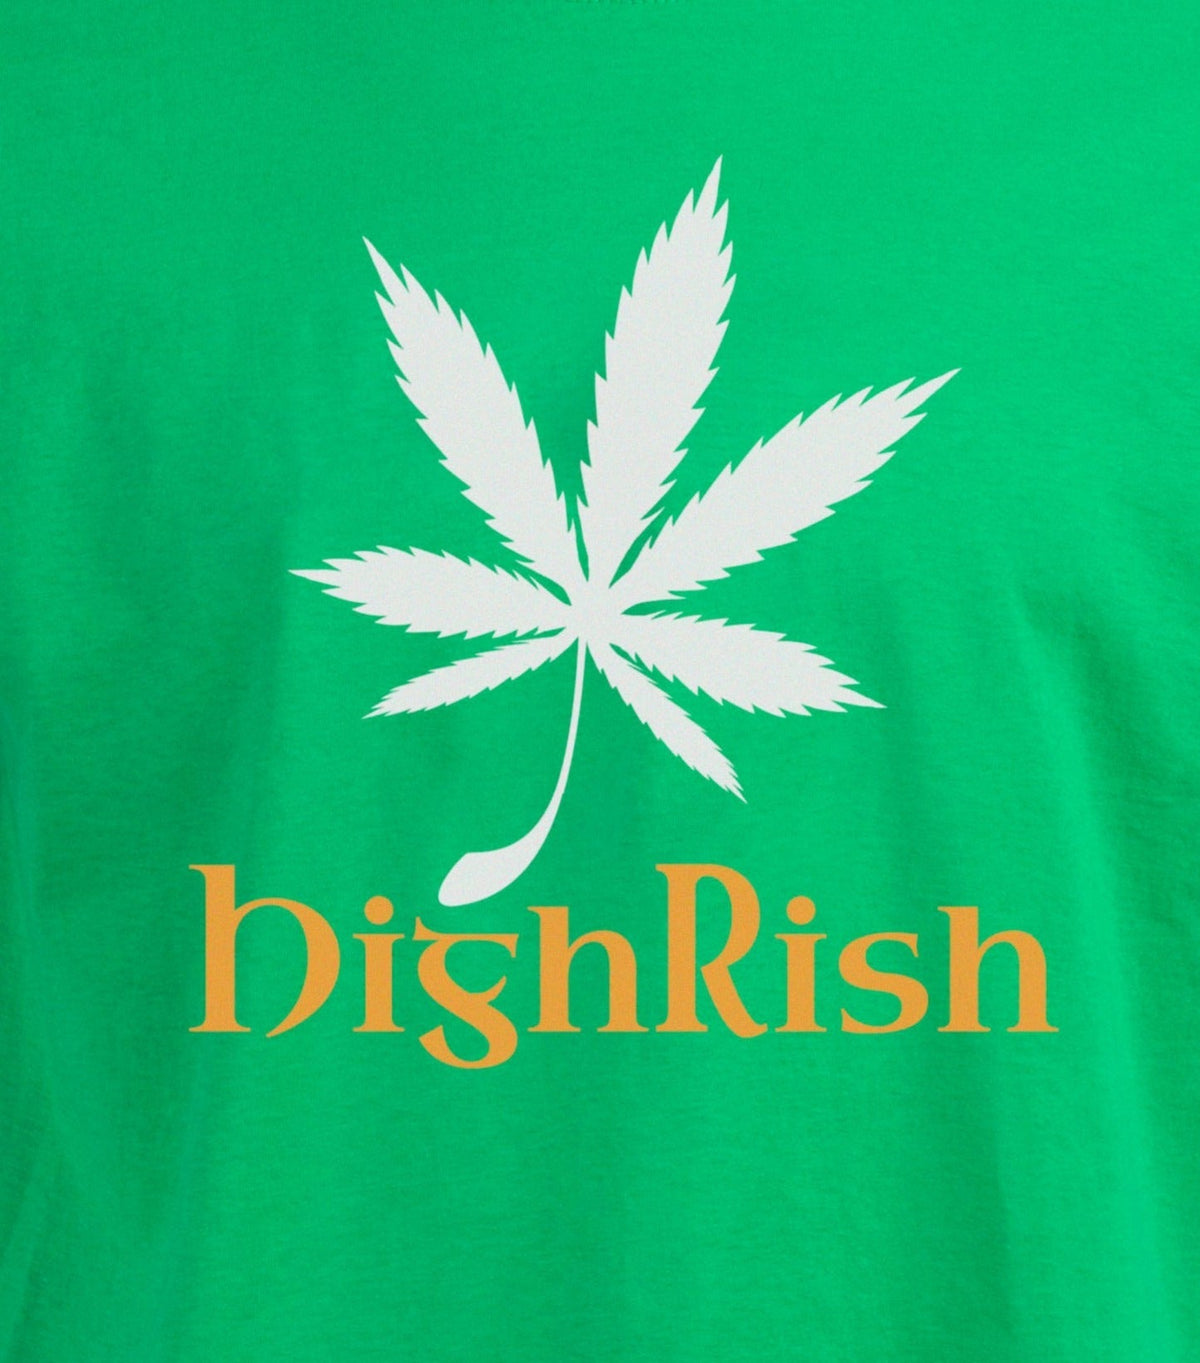 HighRish - St. Patrick's Day Sticky Green Weed Funny Stoner Party T-shirt - Women's